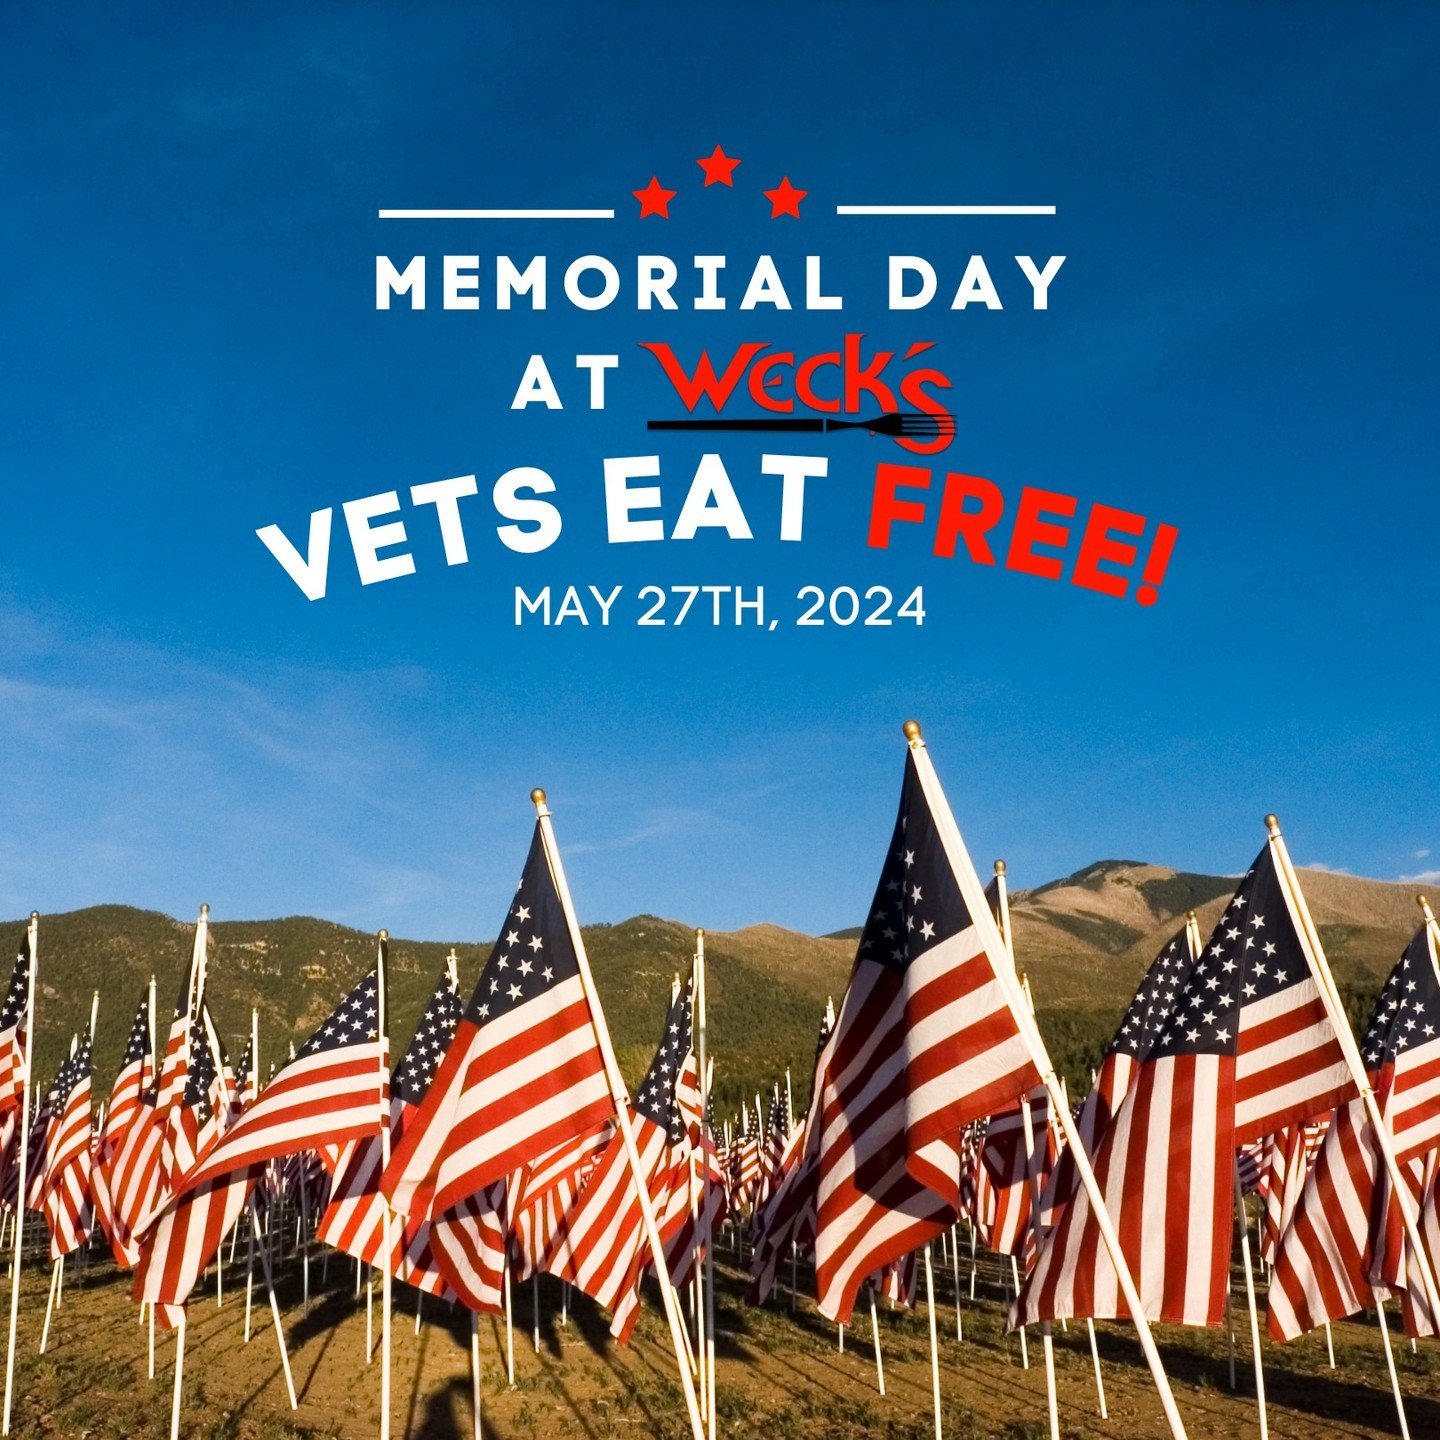 THIS MEMORIAL DAY! 🇺🇲Veterans and Military personnel eat free! We honor all who have fallen while serving our country and all who are currently serving.⁠
⁠
Details:⁠
- Monday, May 27th⁠
- Hours of operation: 7am-2pm ⠀⠀⠀⠀⠀⠀⠀⁠
- One meal per person⠀⠀